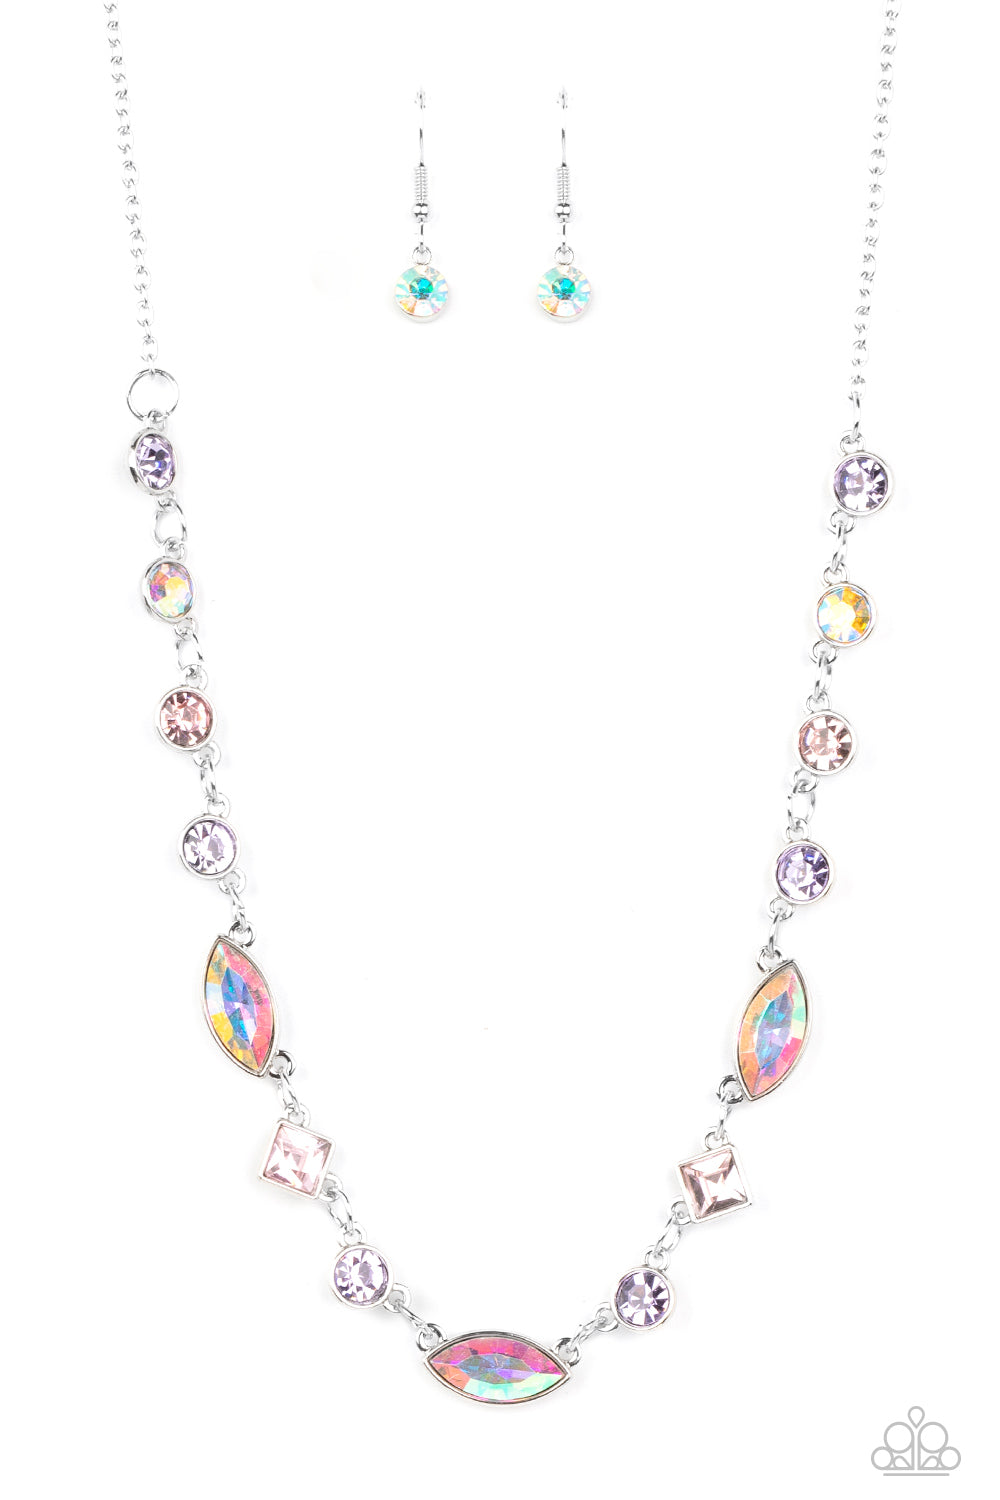 Irresistible HEIR-idescence - Multi ♥ Necklace